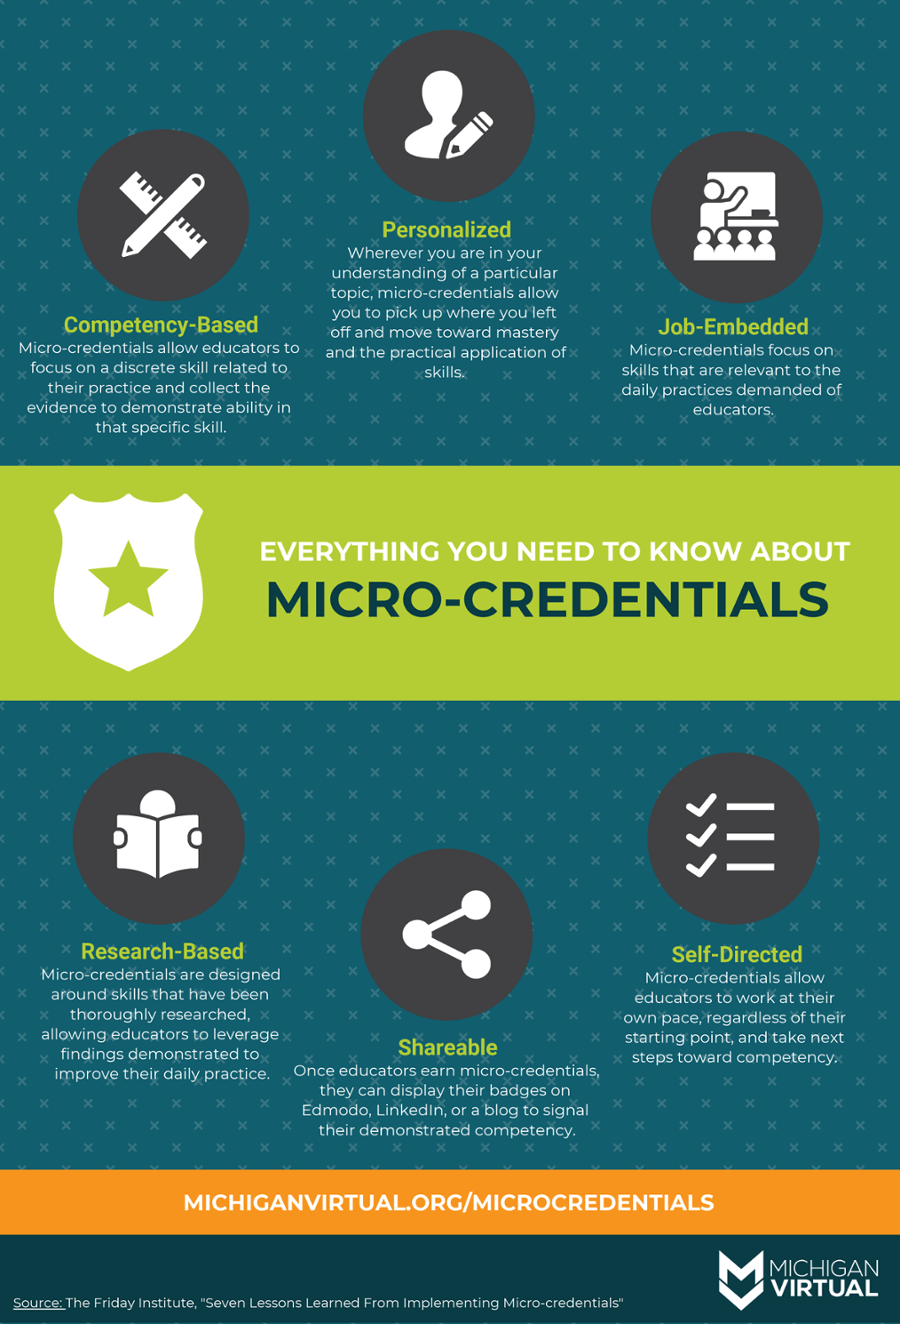 An infographic outlining everything you need to know about micro-credentials